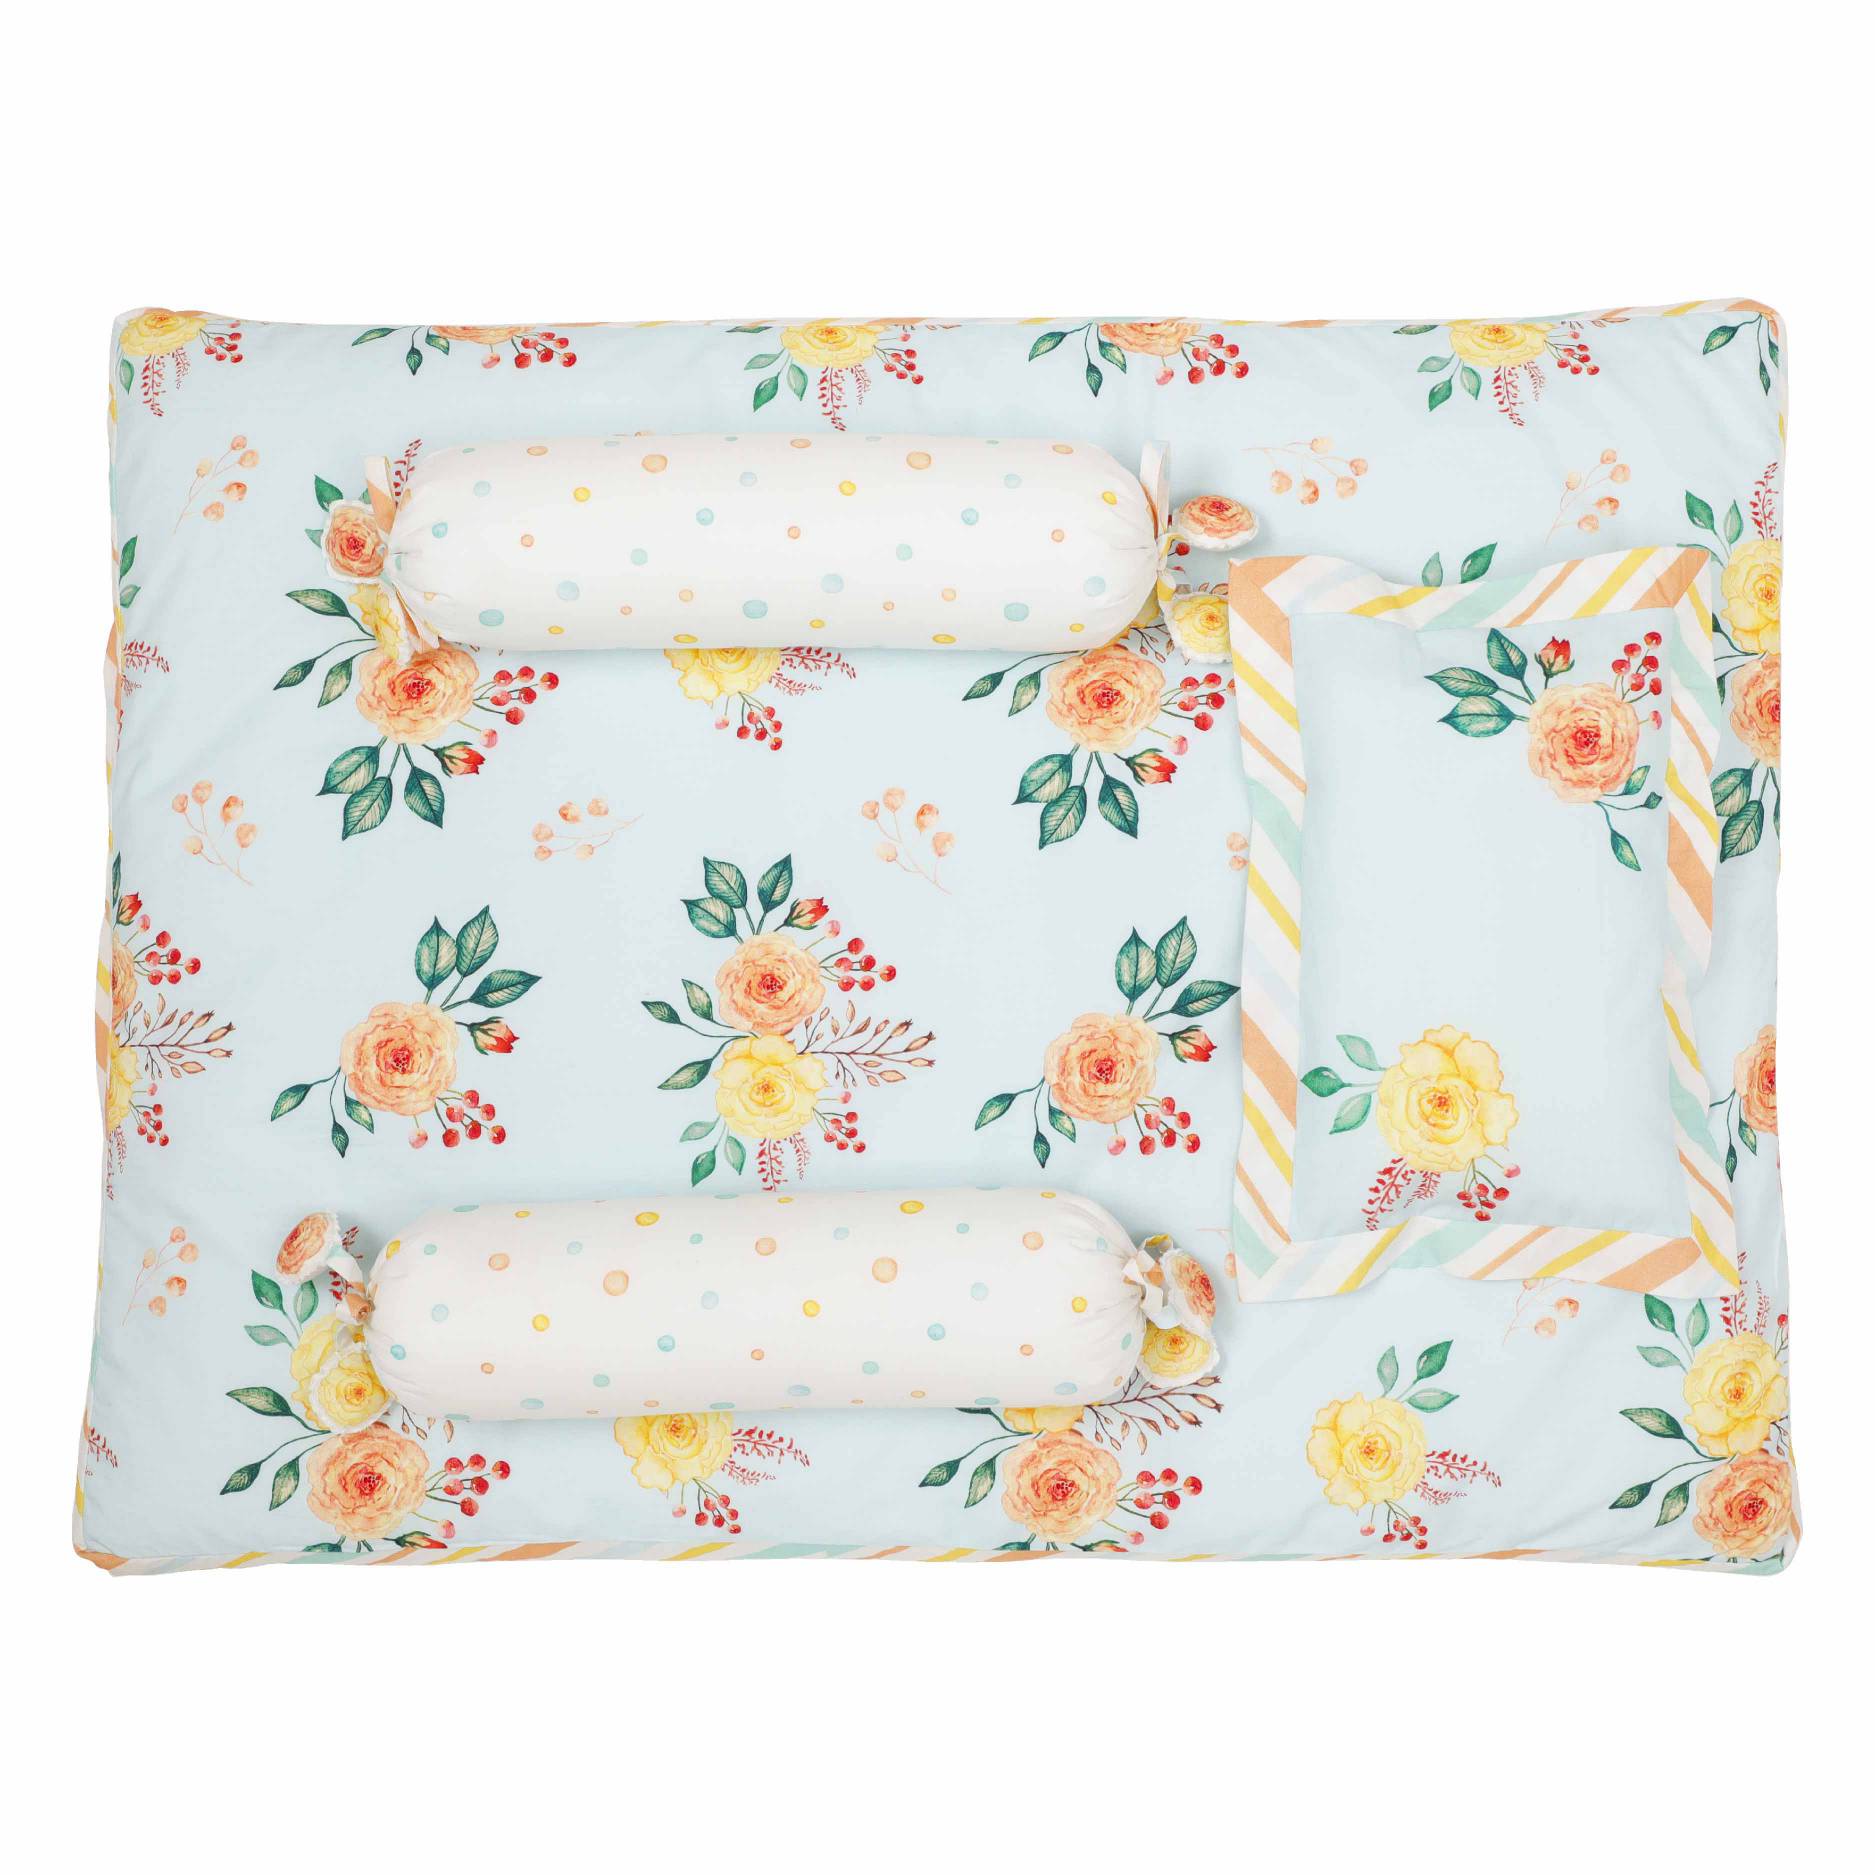 Blossom & Polka - Snuggly Baby Bed